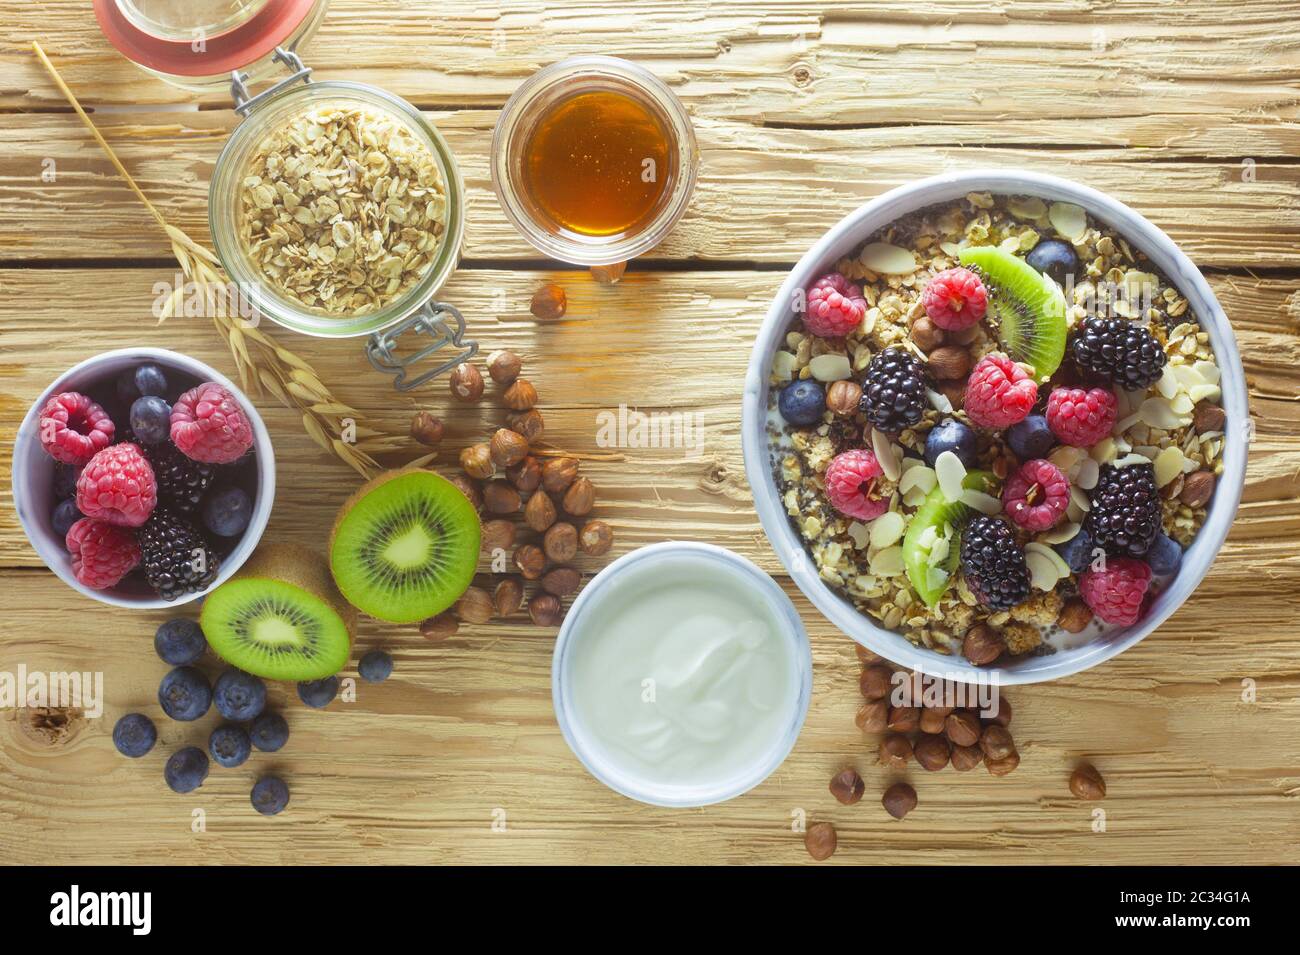 A Bowl Of Muesli With Fruit On A Wooden Background Stock Photo